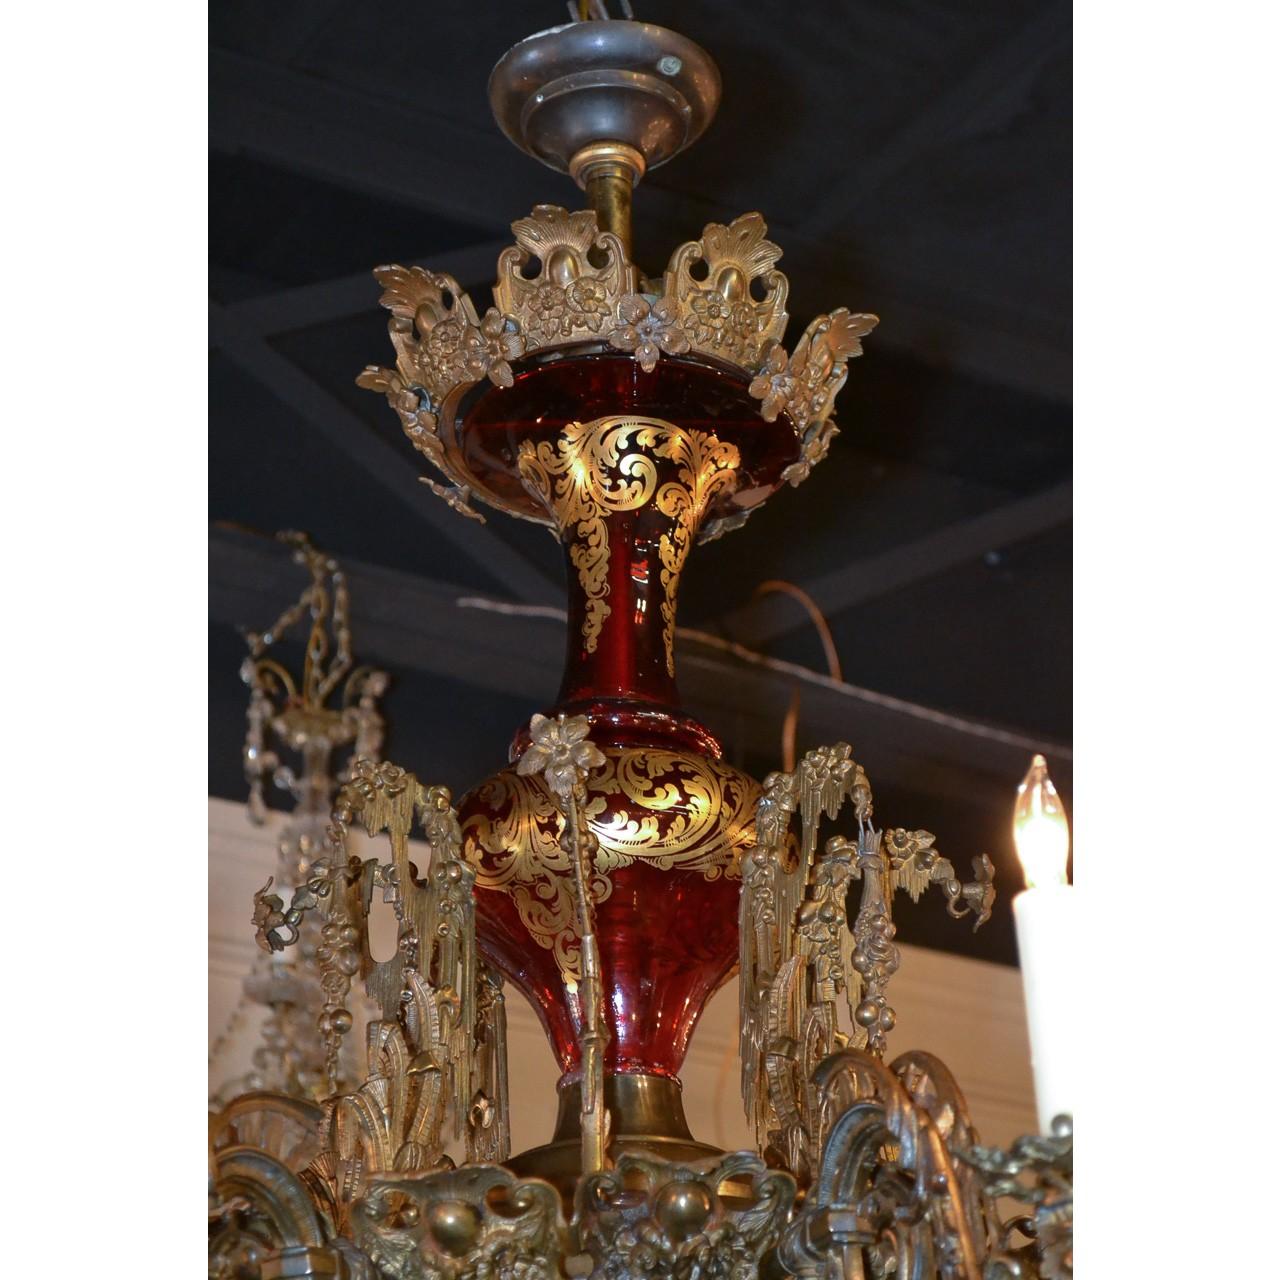 Magnificent and rare 19th century French Belle époque eight-light chandelier with an embossed leaf-spray bronze canopy atop a shaped ruby glass stem decorated with gold stylized leaf overlay. The brass mid-section with superb flower-head and leaf